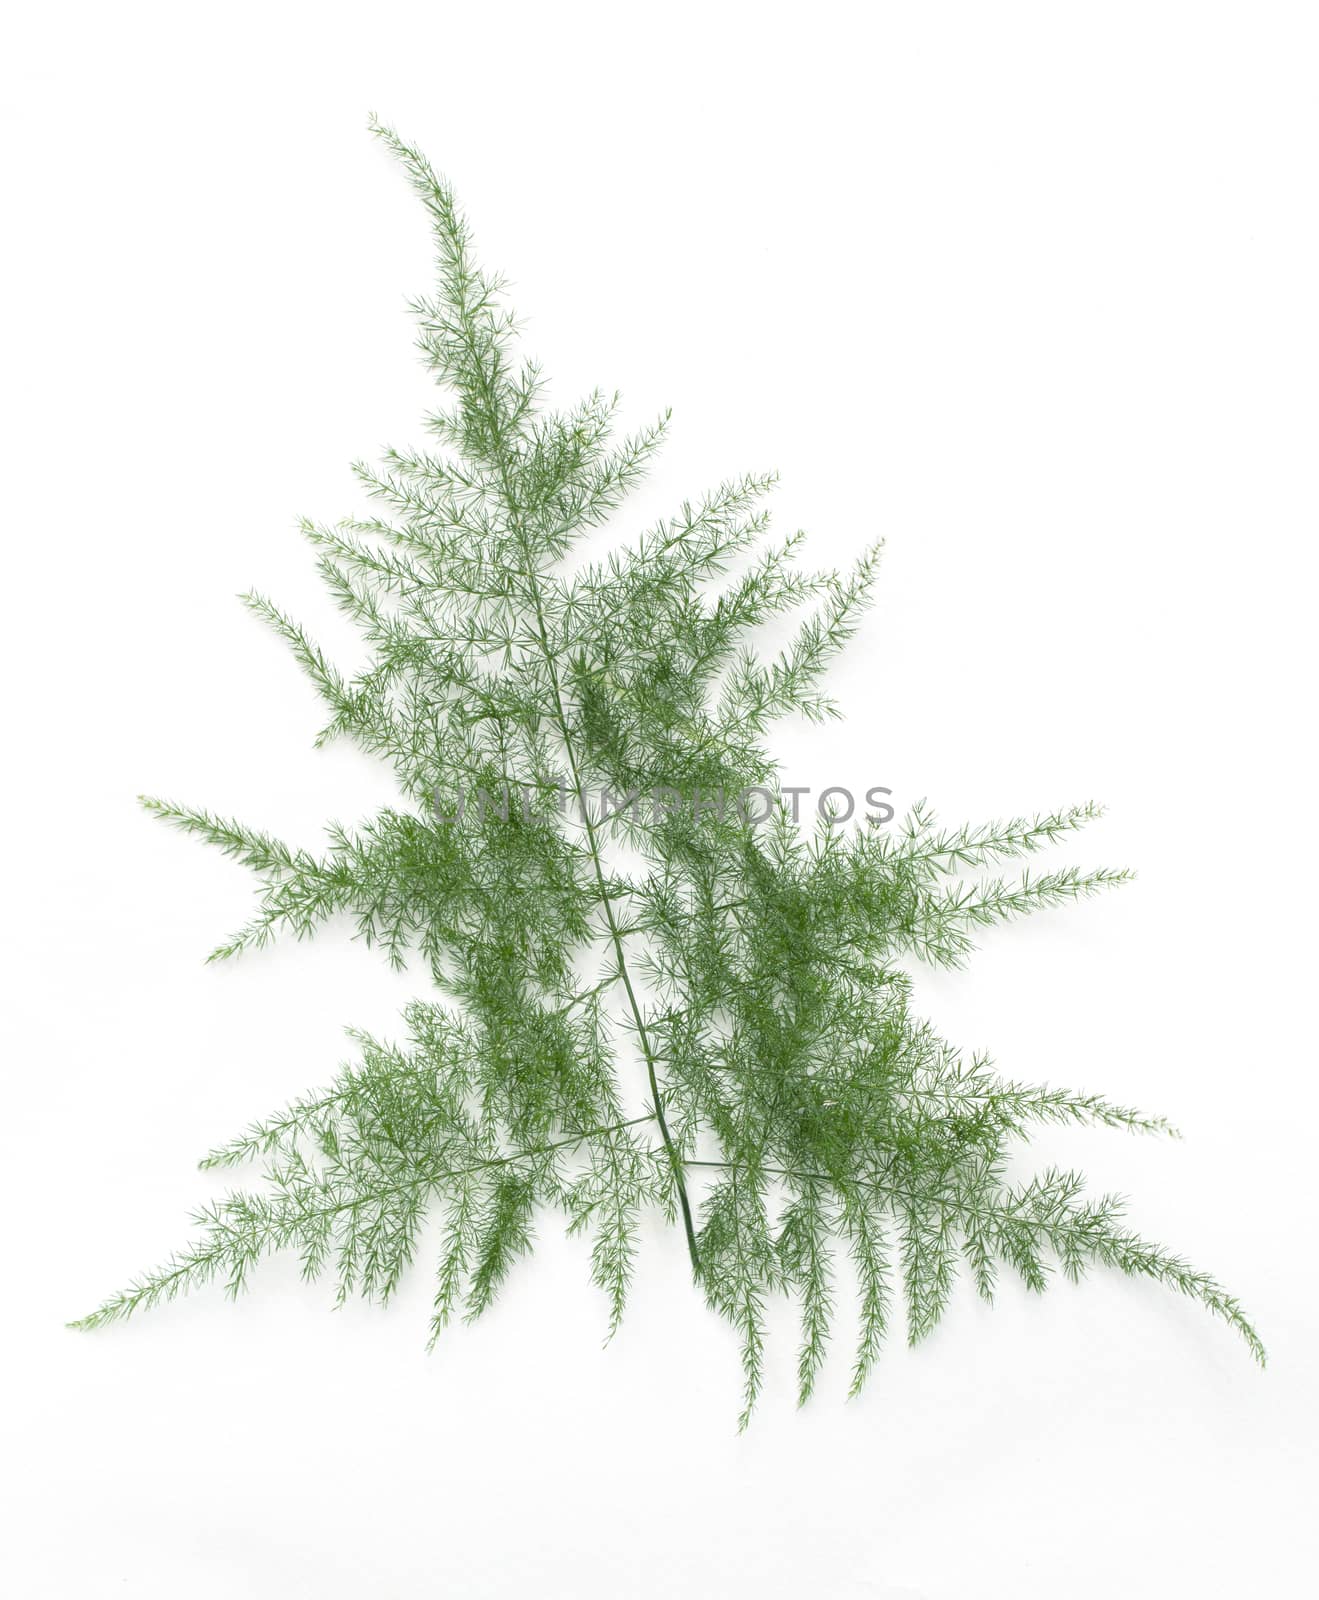 Tropical leaves isolated on white background with clipping path.